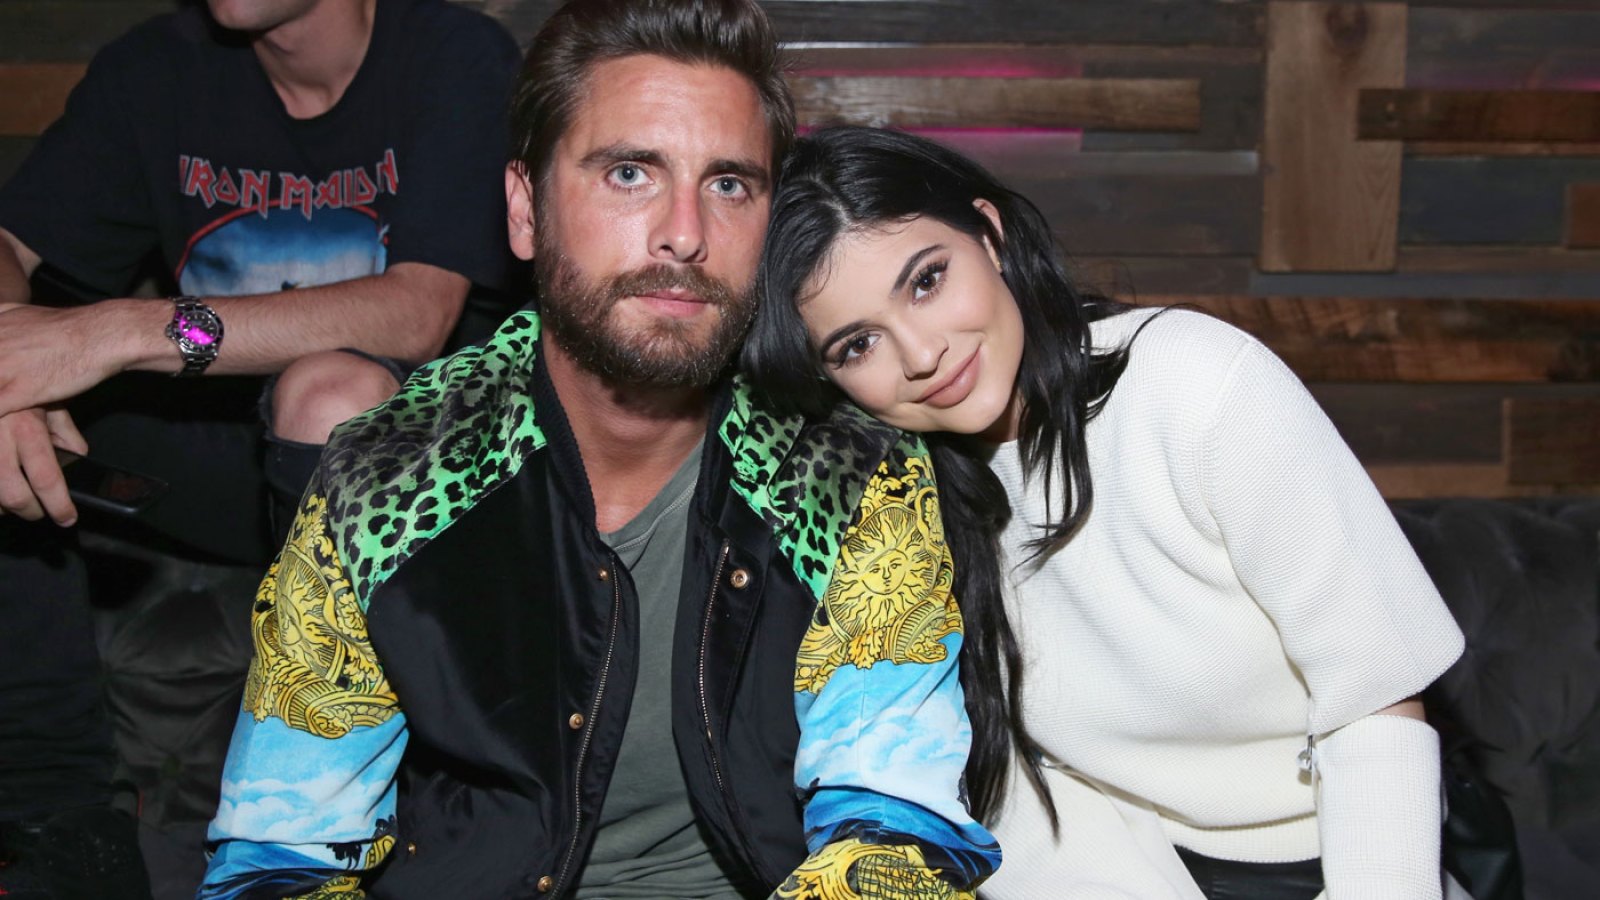 Kylie Jenner parties with Scott Disick after her split from Tyga.